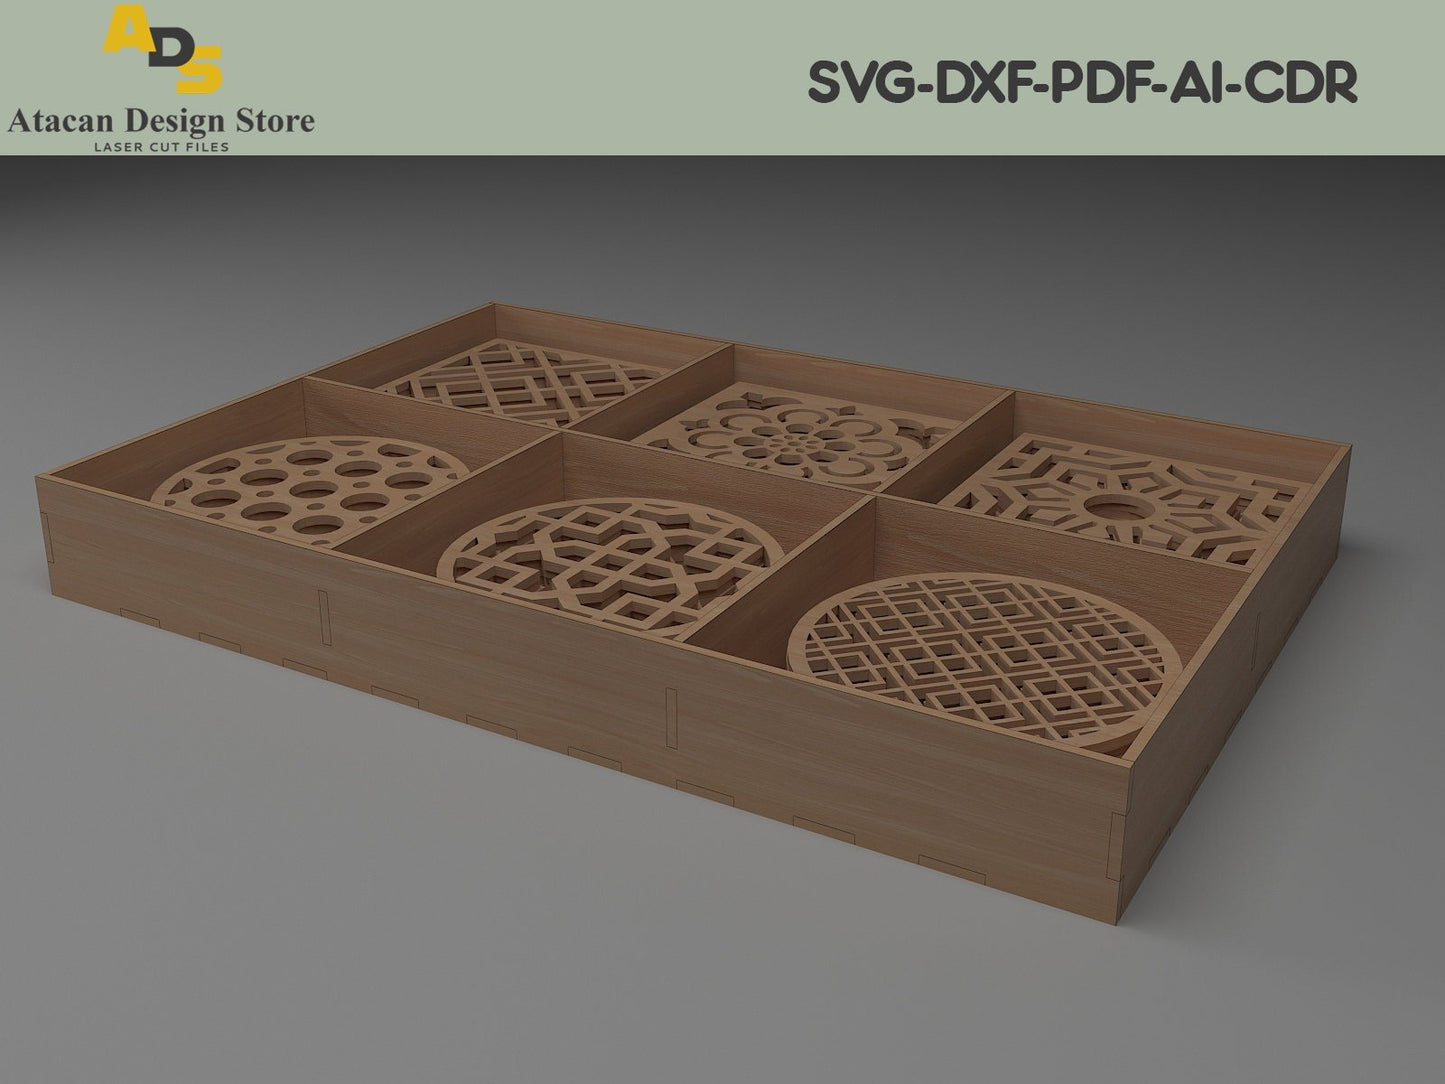 Wooden Coaster Set and Box With Dividers / Box for Coasters / Laser Cut Dxf Glowforge Svg CNC ADS204